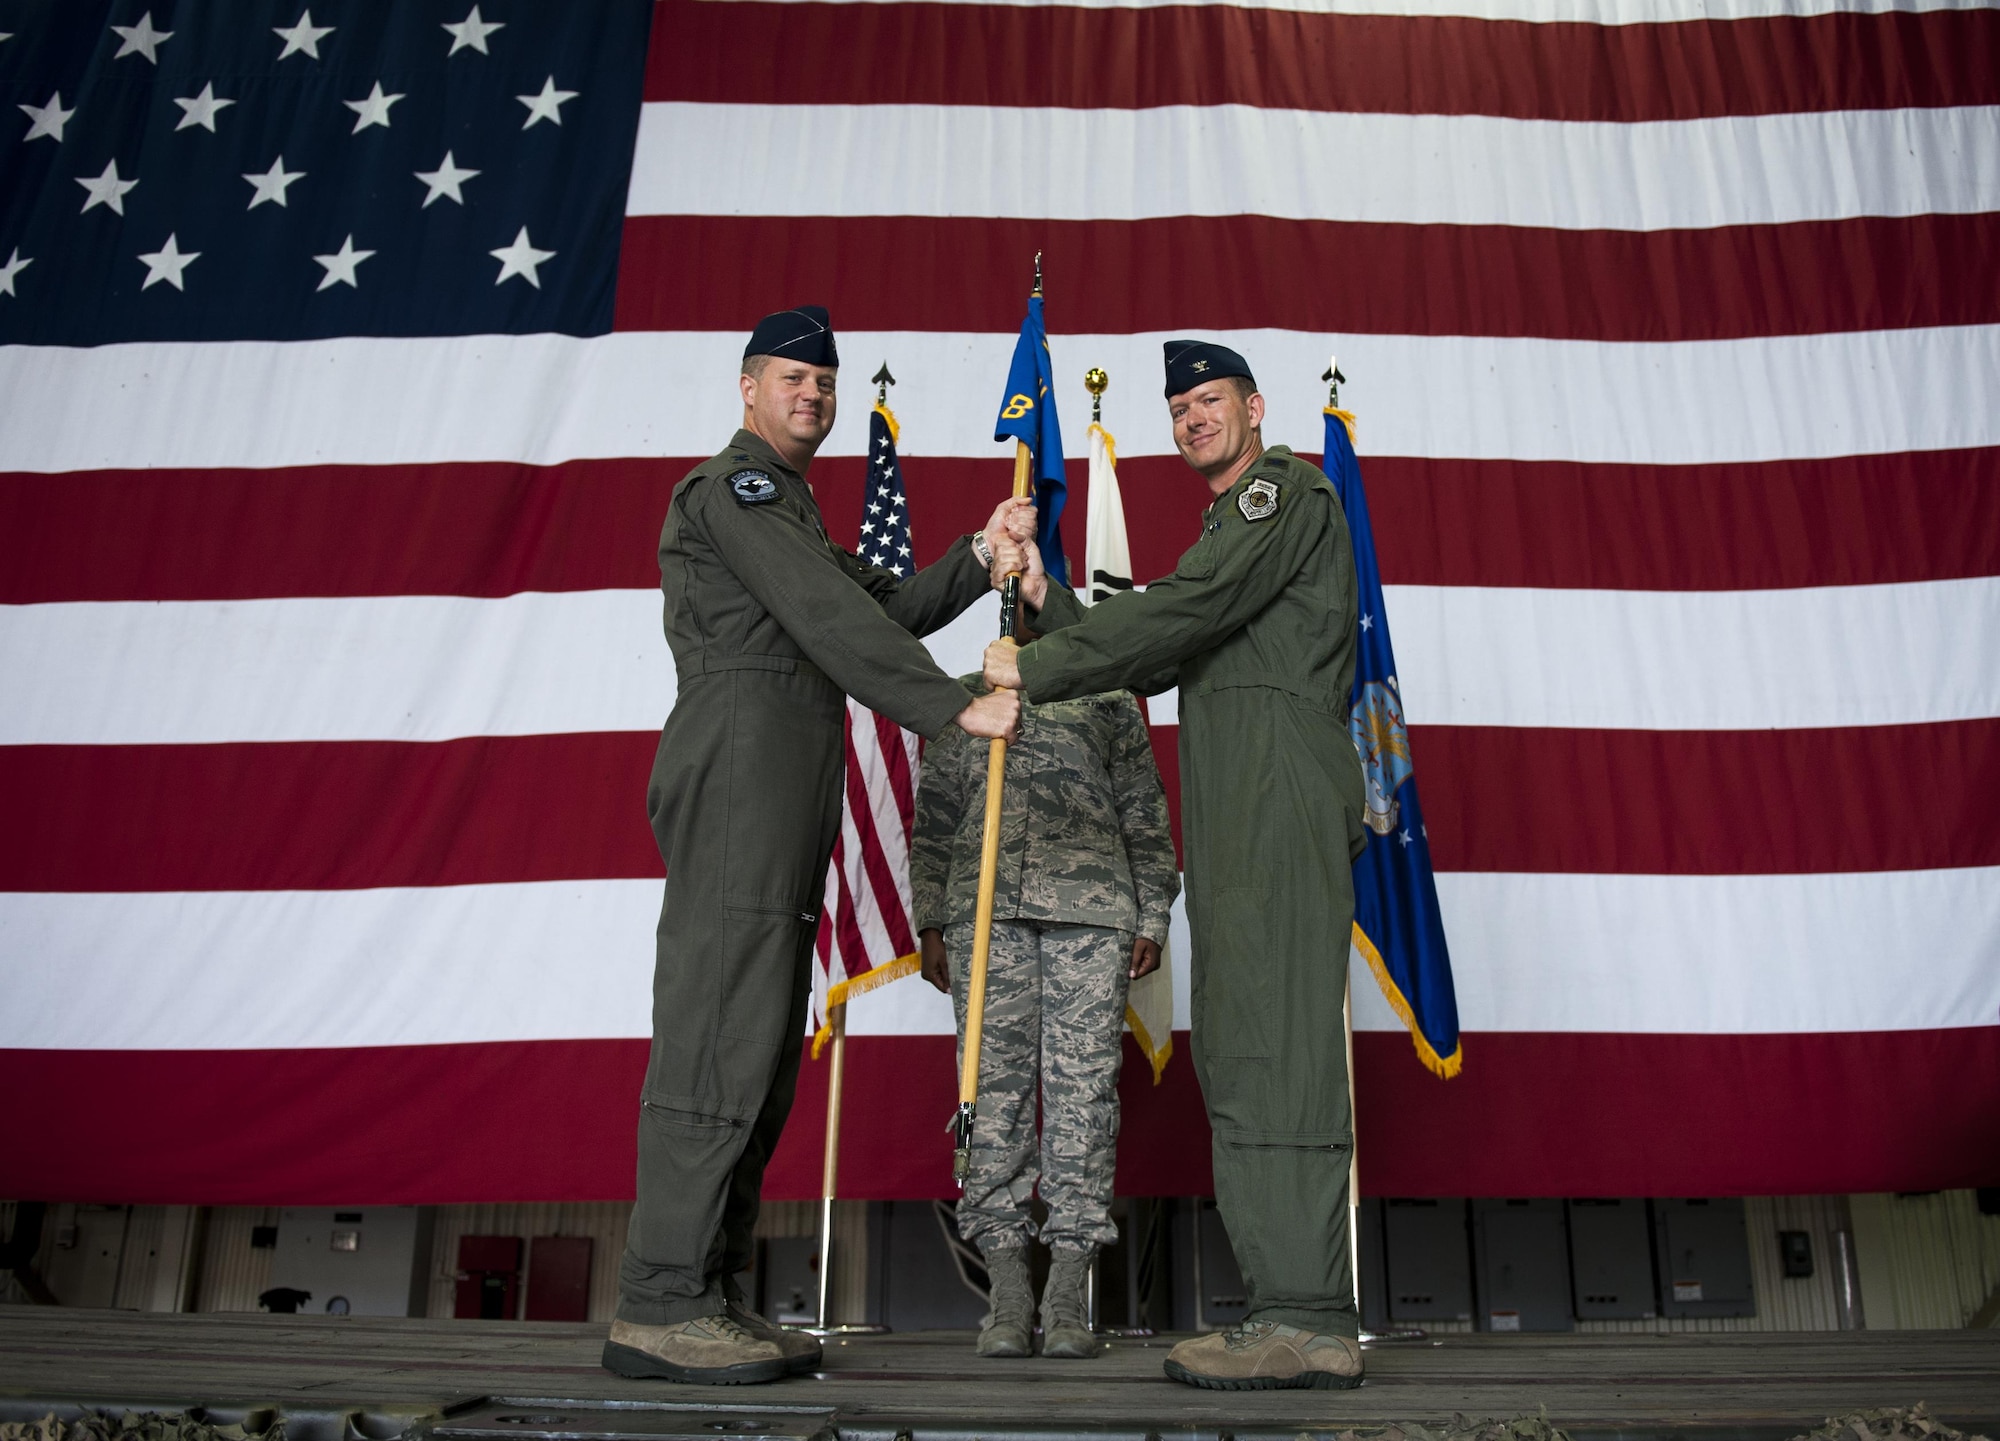 U.S. Air Force Col. Kristopher Struve, 8th Operations Group commander, receives the guidon from Col. David Shoemaker, 8th Fighter Wing commander, during an assumption of command ceremony at Kunsan Air Base, Republic of Korea, July 31, 2017. Shoemaker presided over the ceremony in which Struve took command of the 8th OG and, upon assuming the position, received the title of “Viper.” (U.S. Air Force photo by Senior Airman Colville McFee/Released)